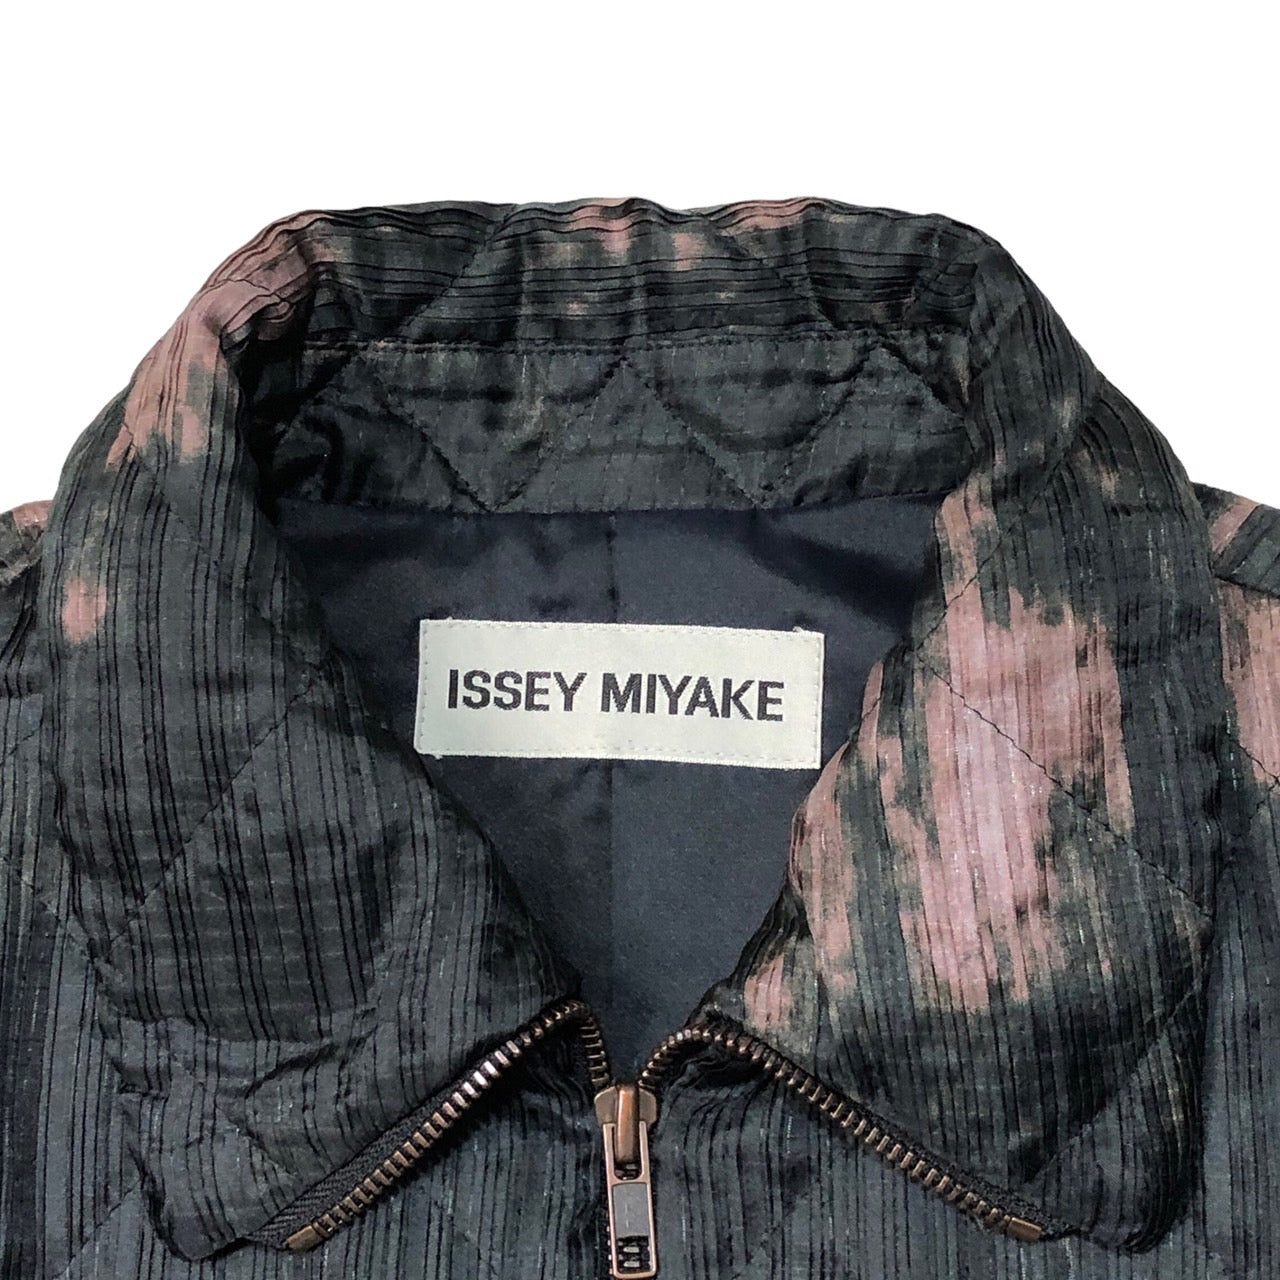 ISSEY MIYAKE(イッセイミヤケ) 98AW Vintage bleached quilted pleated  jacket/ヴィンテージ脱色加工キルティングプリーツジャケット/90年代/アーカイブ IM84-FD924 SIZE M ブラック×パープル